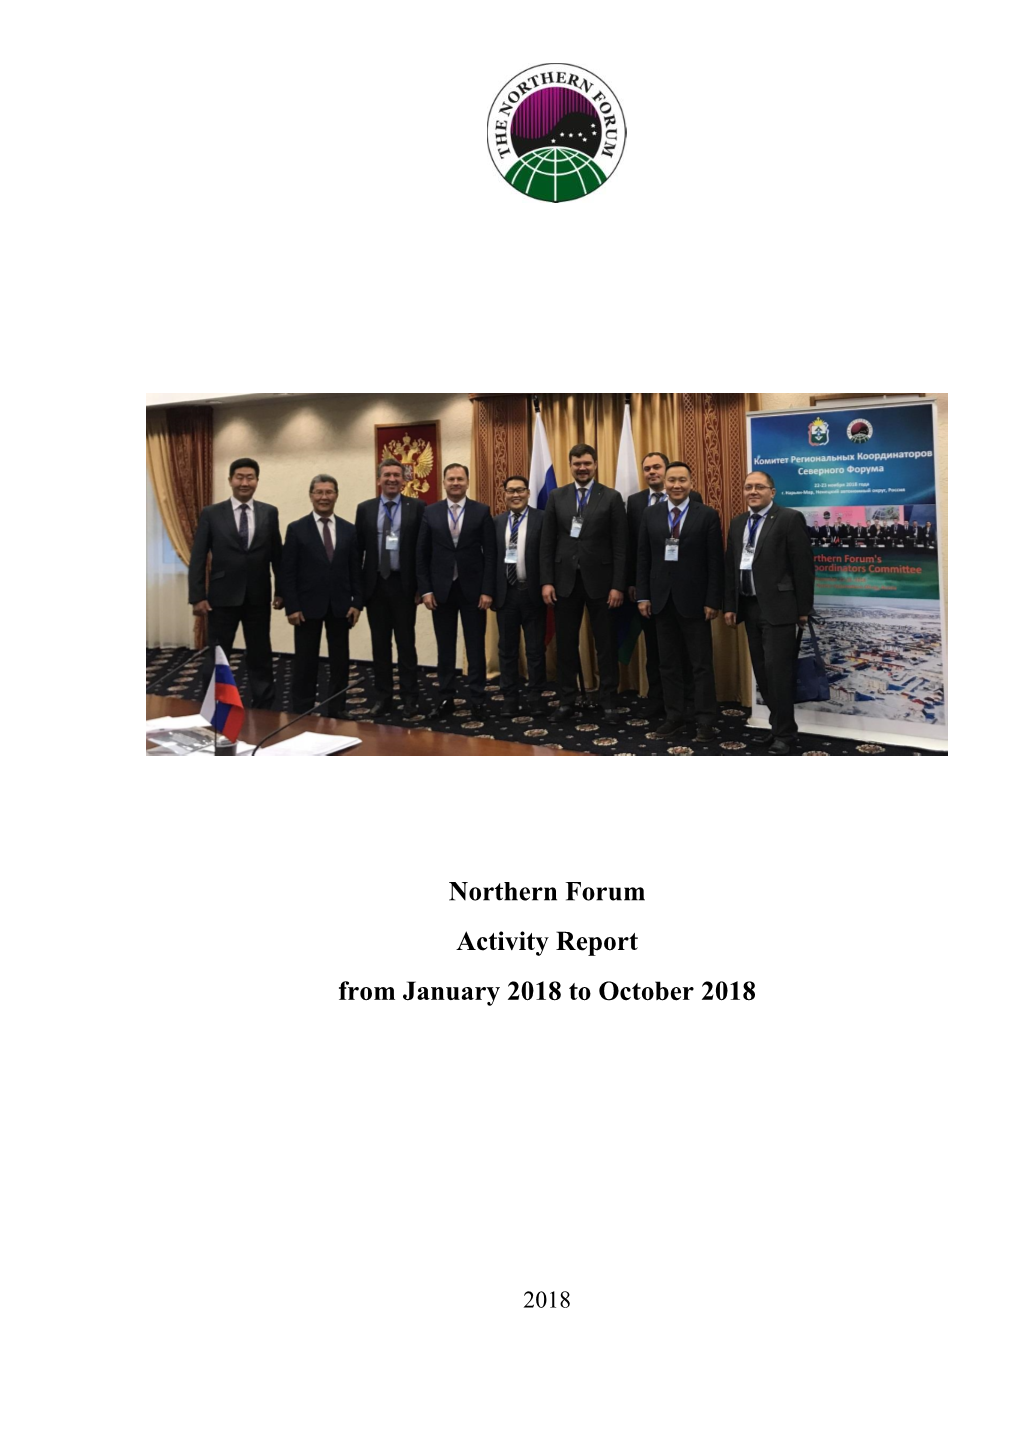 Northern Forum Activity Report from January 2018 to October 2018